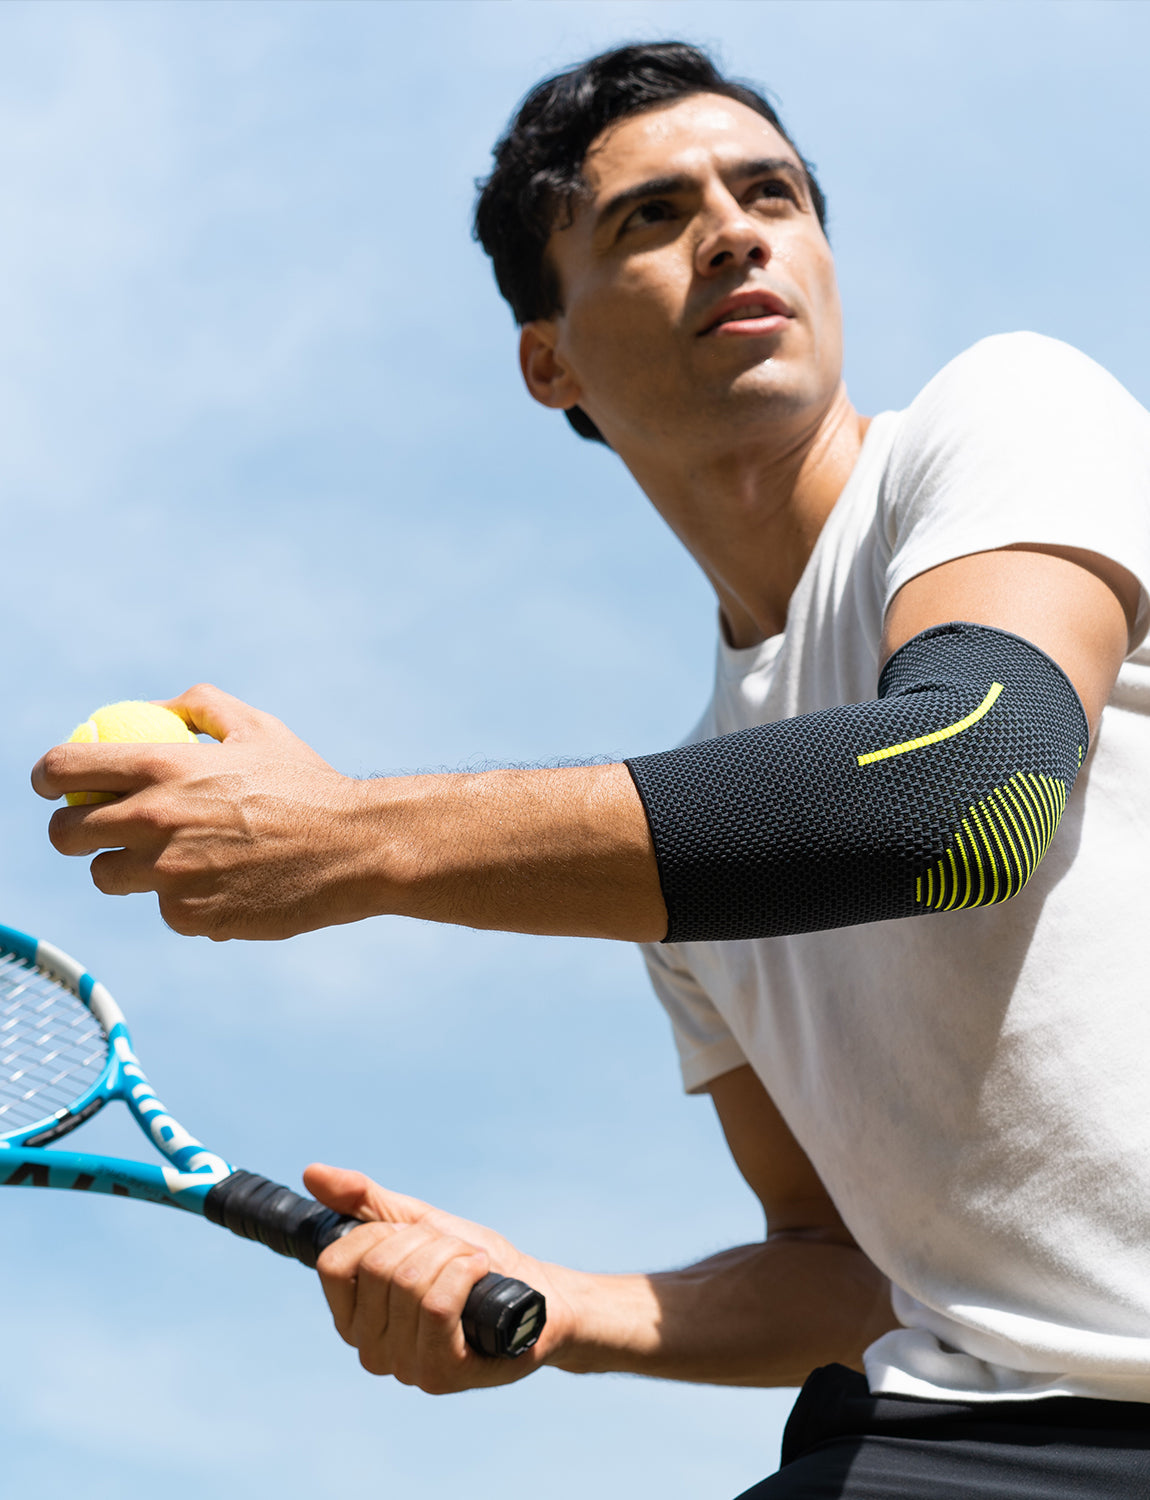 Active Elbow Support